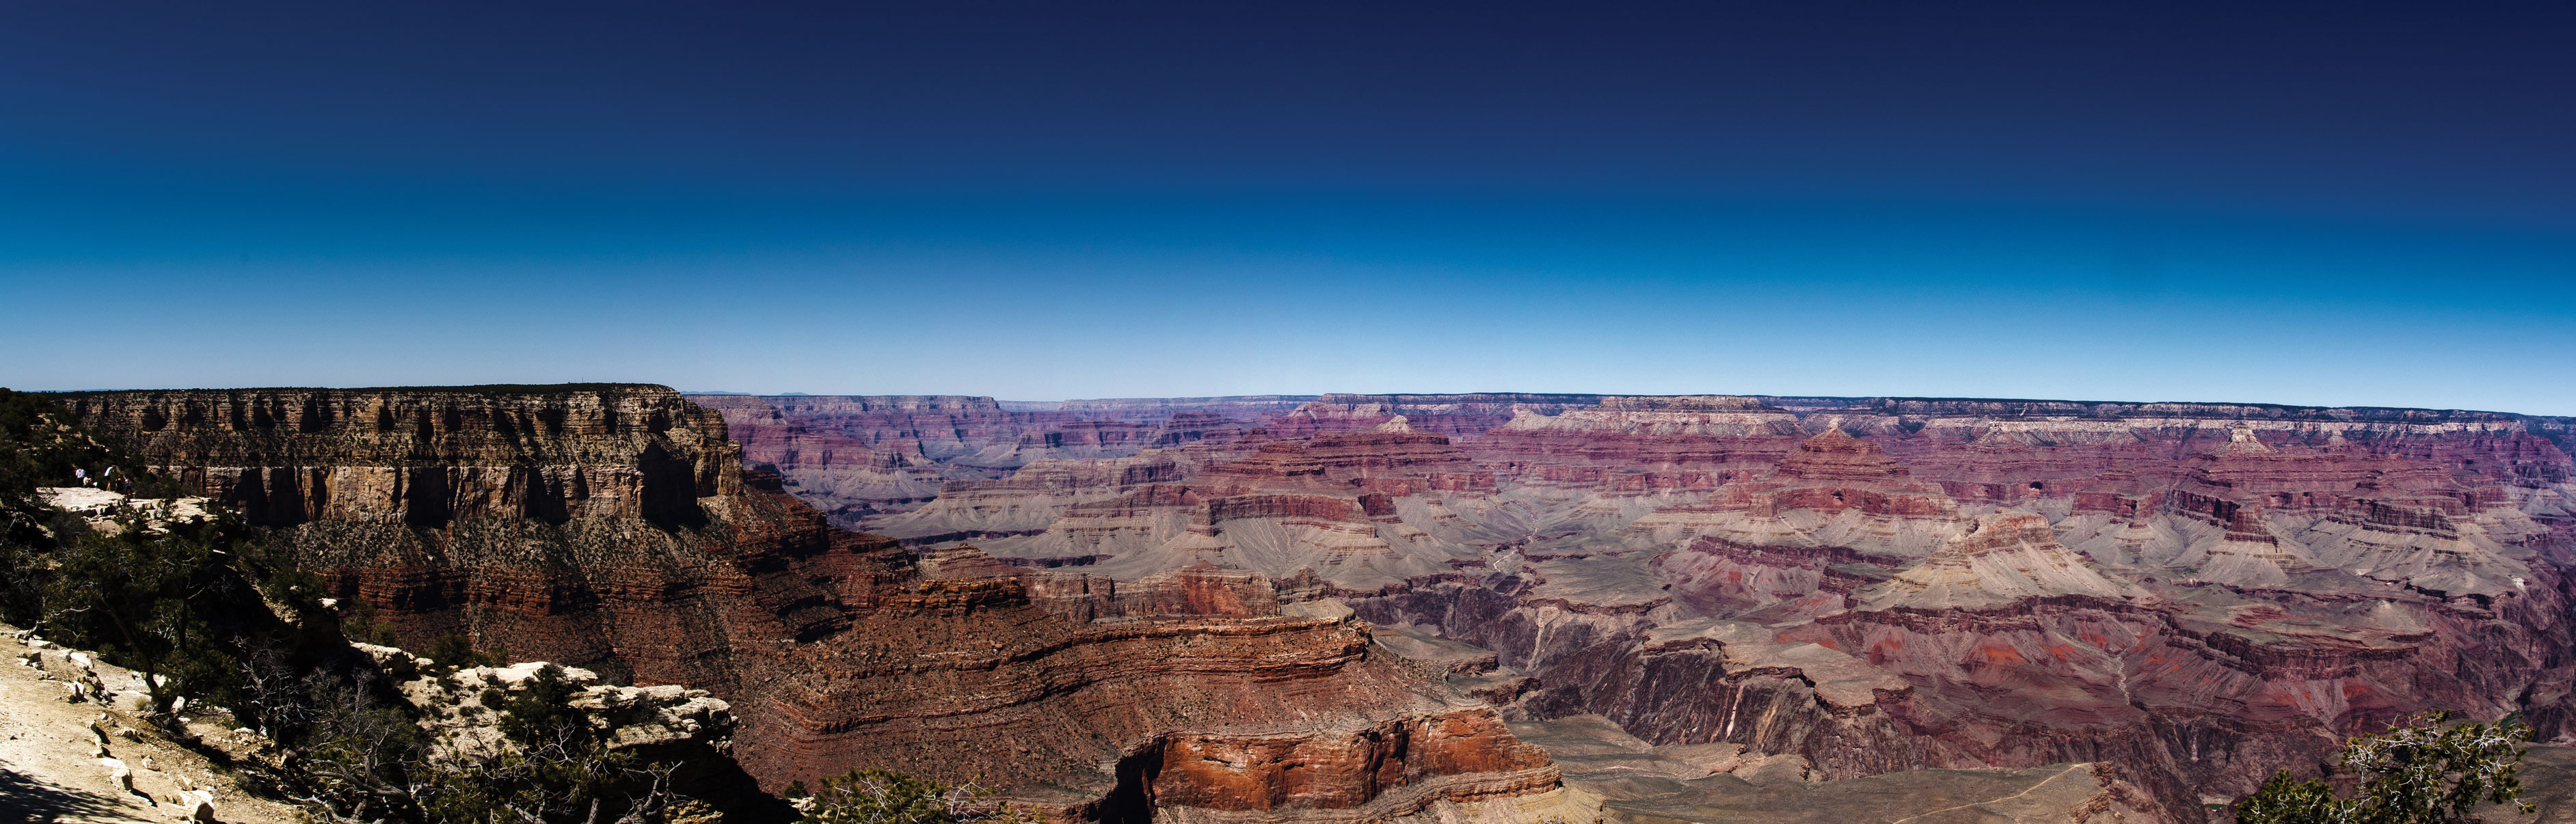 A panorama from the Grand Canyon National Park. Over five million visitors witness the Grand Canyon’s beauty every year. Photo by Lauren Prochelo, cc. 